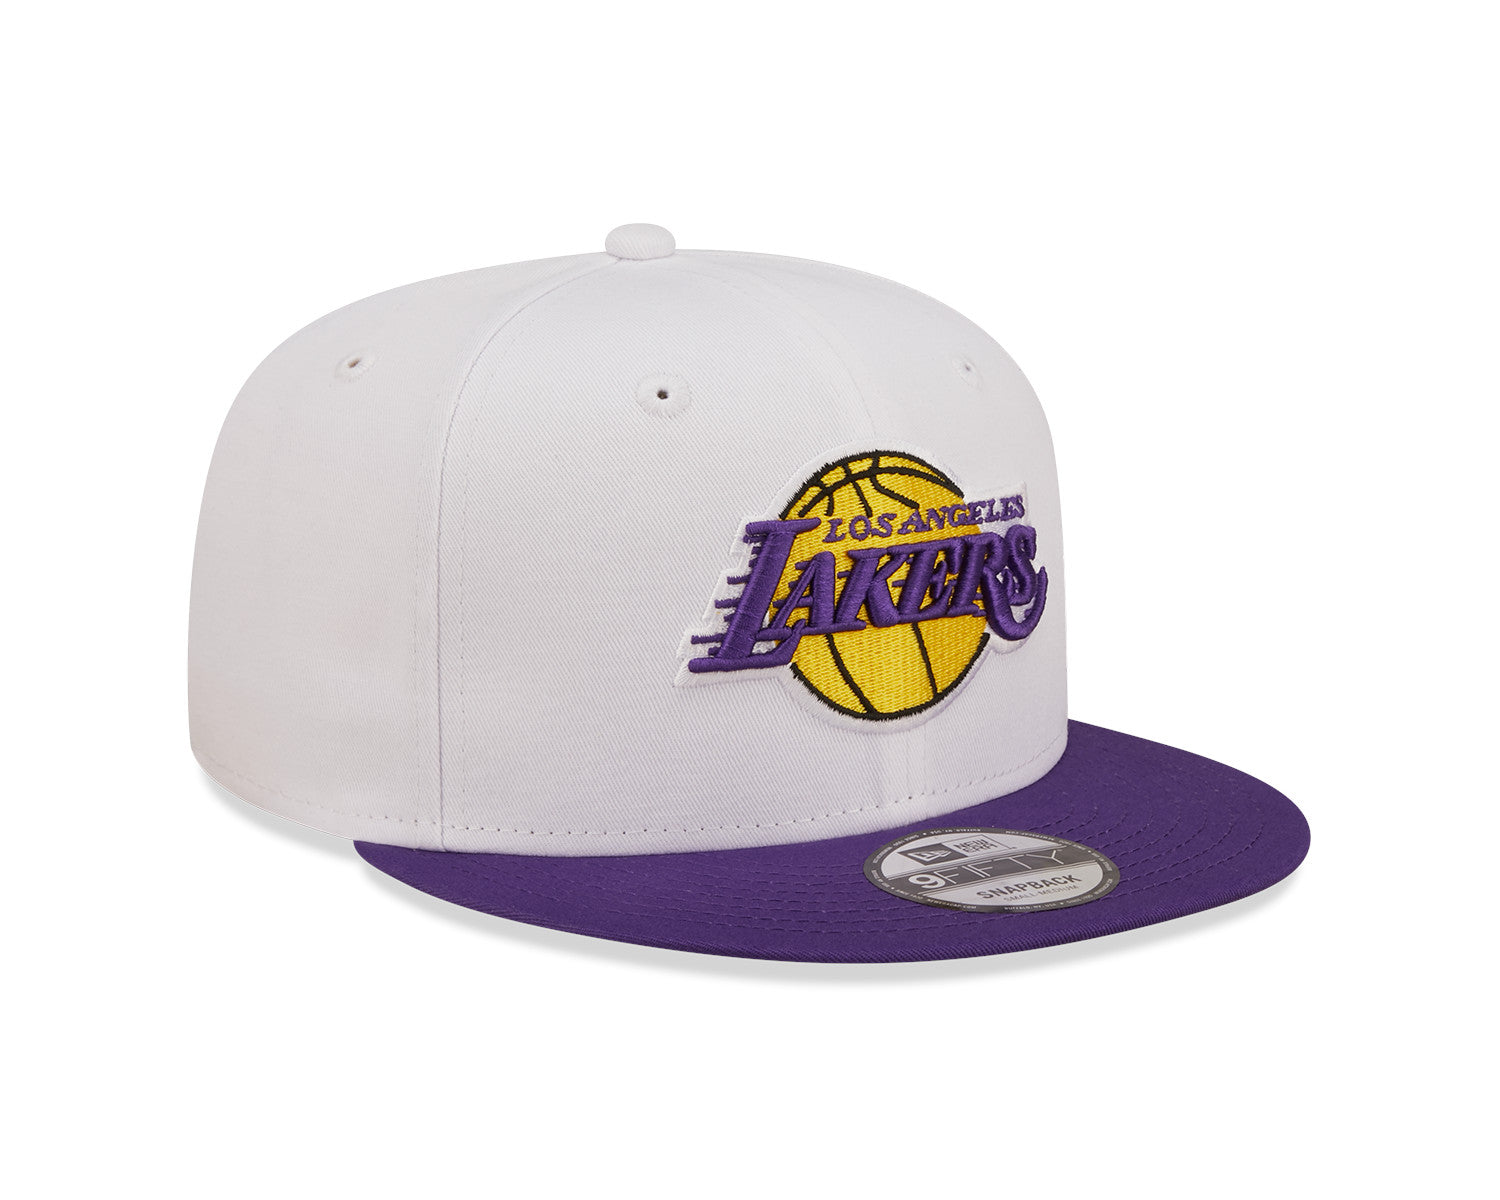 Los Angeles Lakers 9FIFTY White Crown Team White/Purple Cap – NewEra